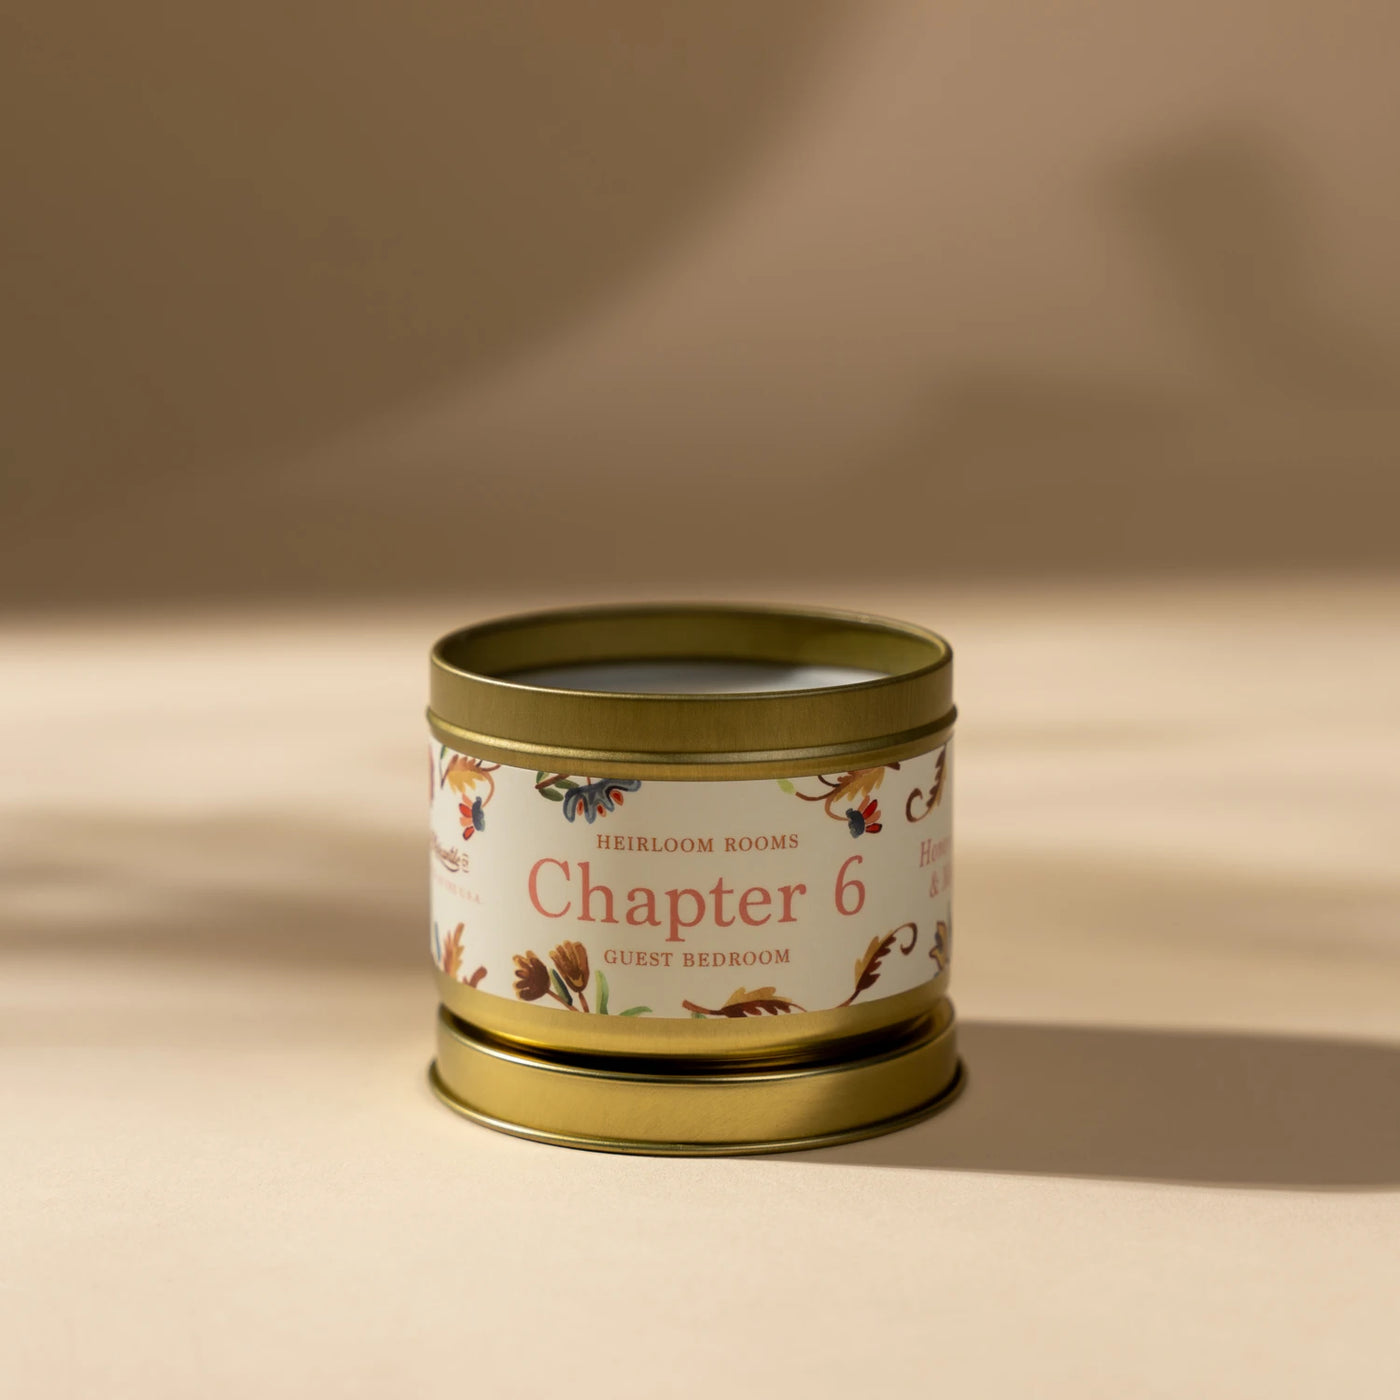 Chapter 6 - Guest Bedroom 5 oz. Candle